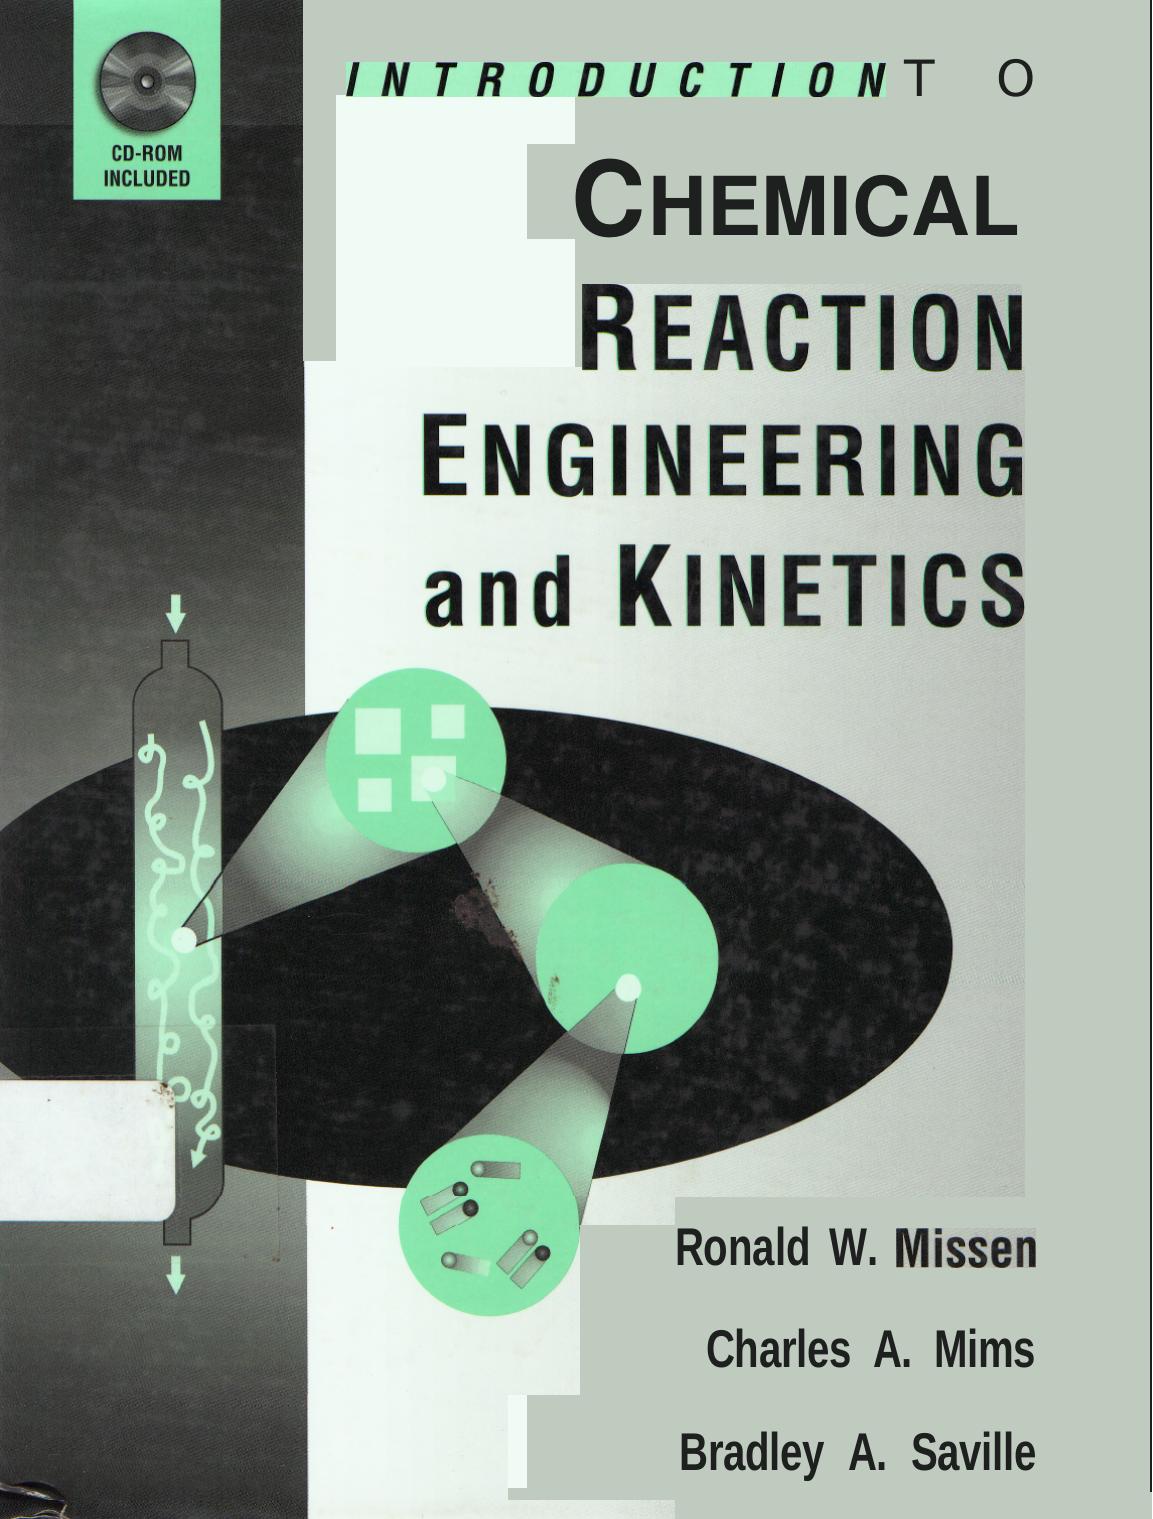 CHEMICAL REACTION ENGINEERING & Kinectics                                                                 1999